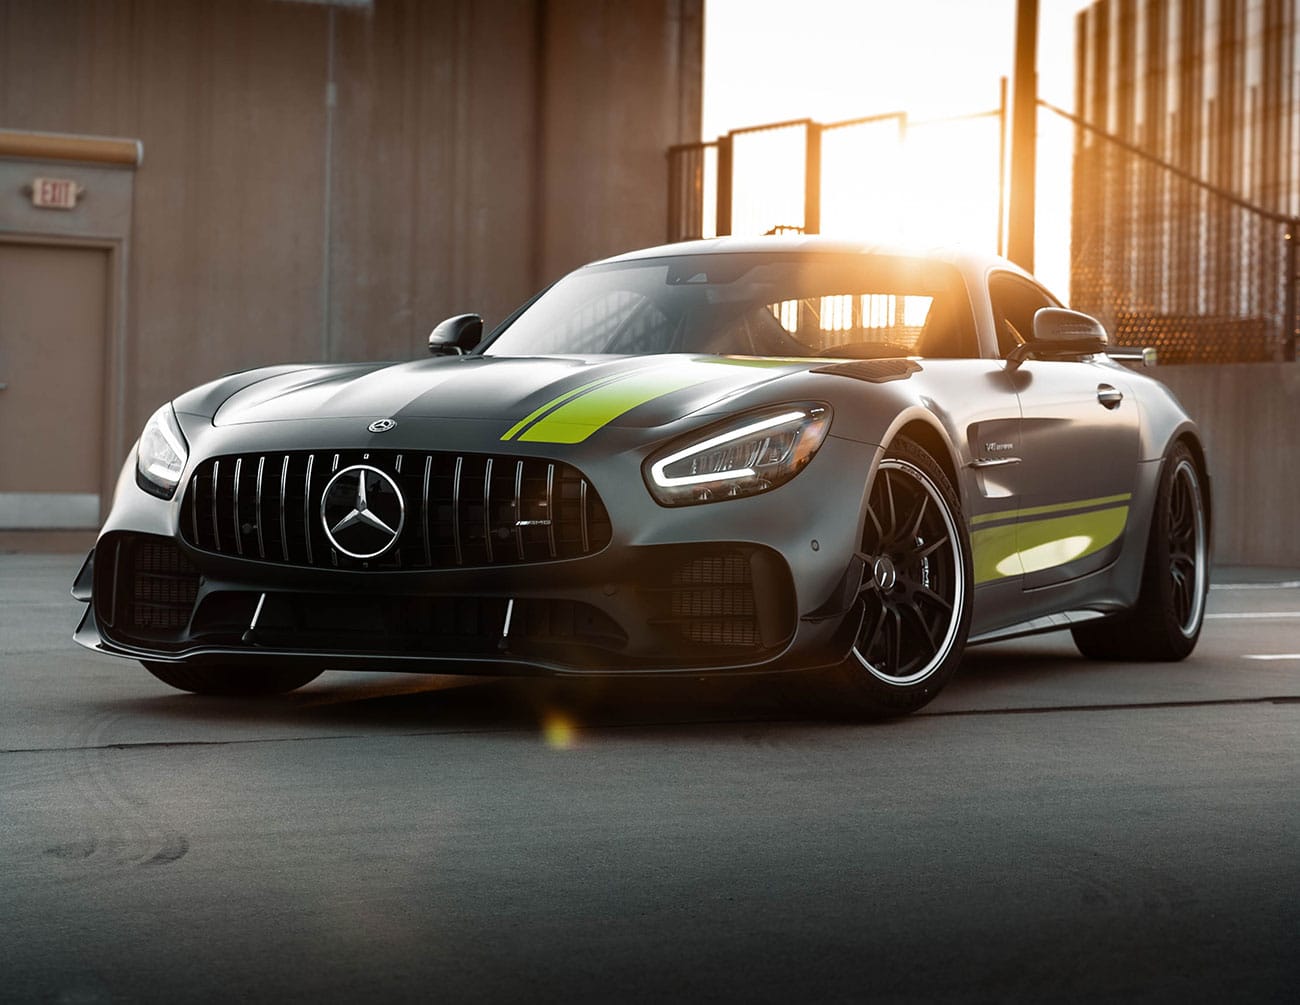 Mercedes Amg Gt R Pro Wallpapers